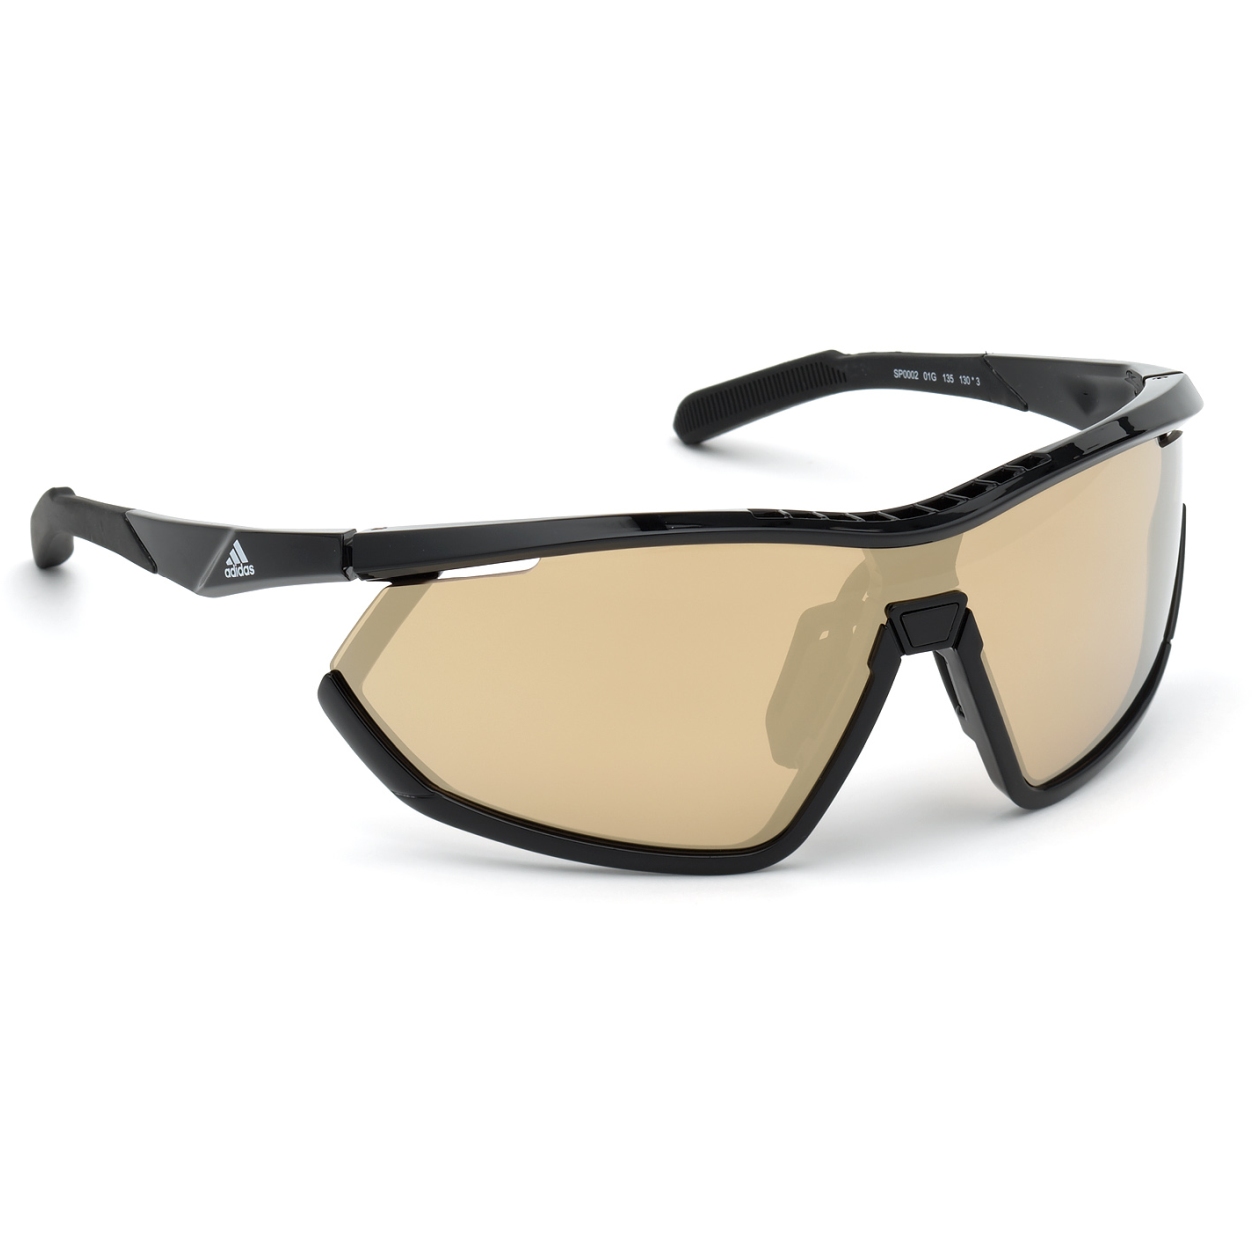 Picture of adidas Sp0002 Injected Sport Sunglasses - Shiny Black / Contrast Mirror Brown + Orange